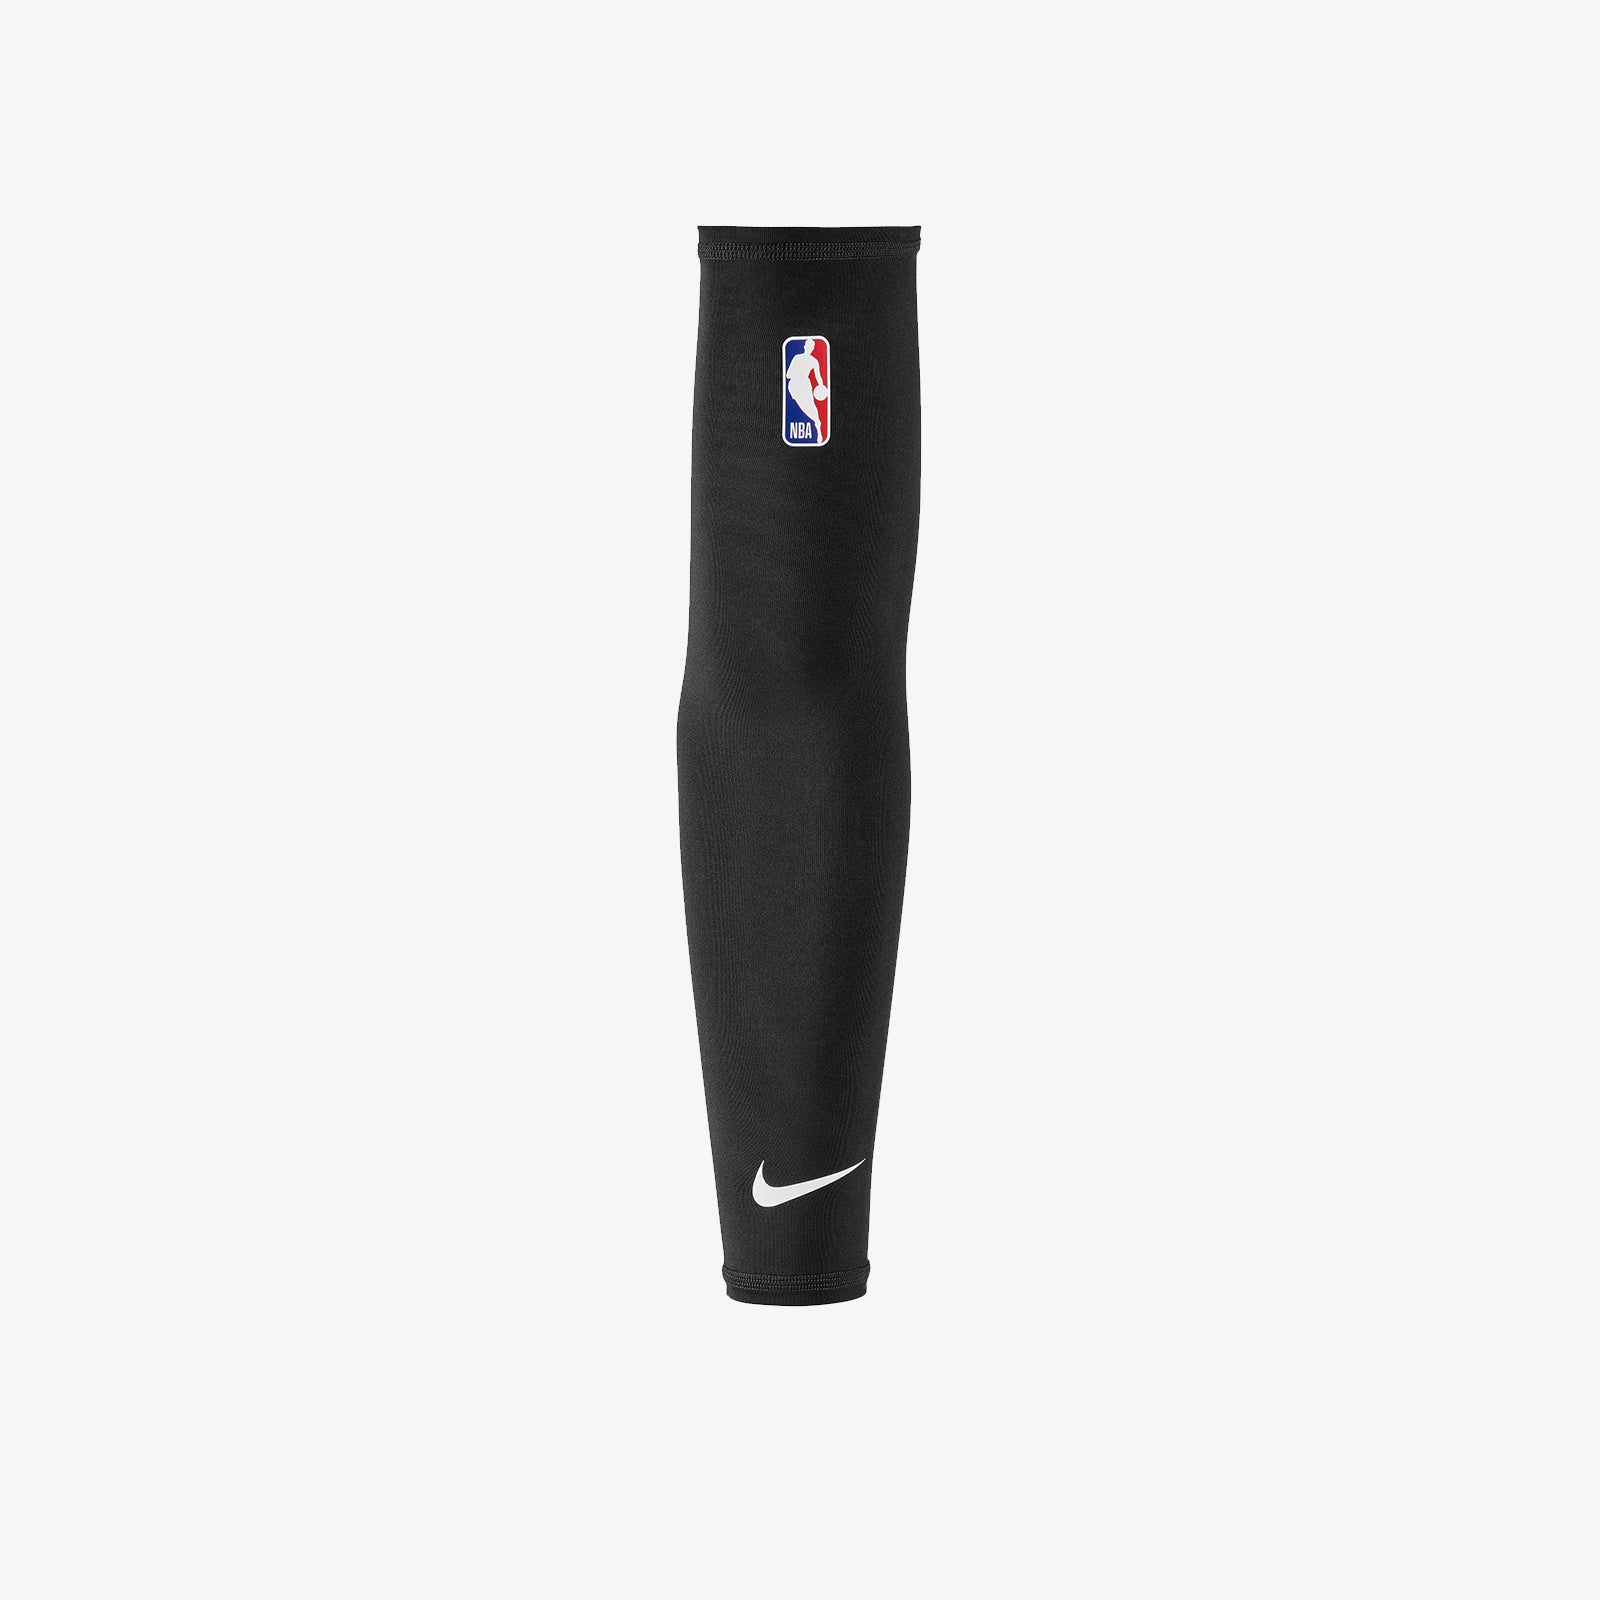 Nike Official On Court NBA Shooter Sleeve - Black/White - Throwback